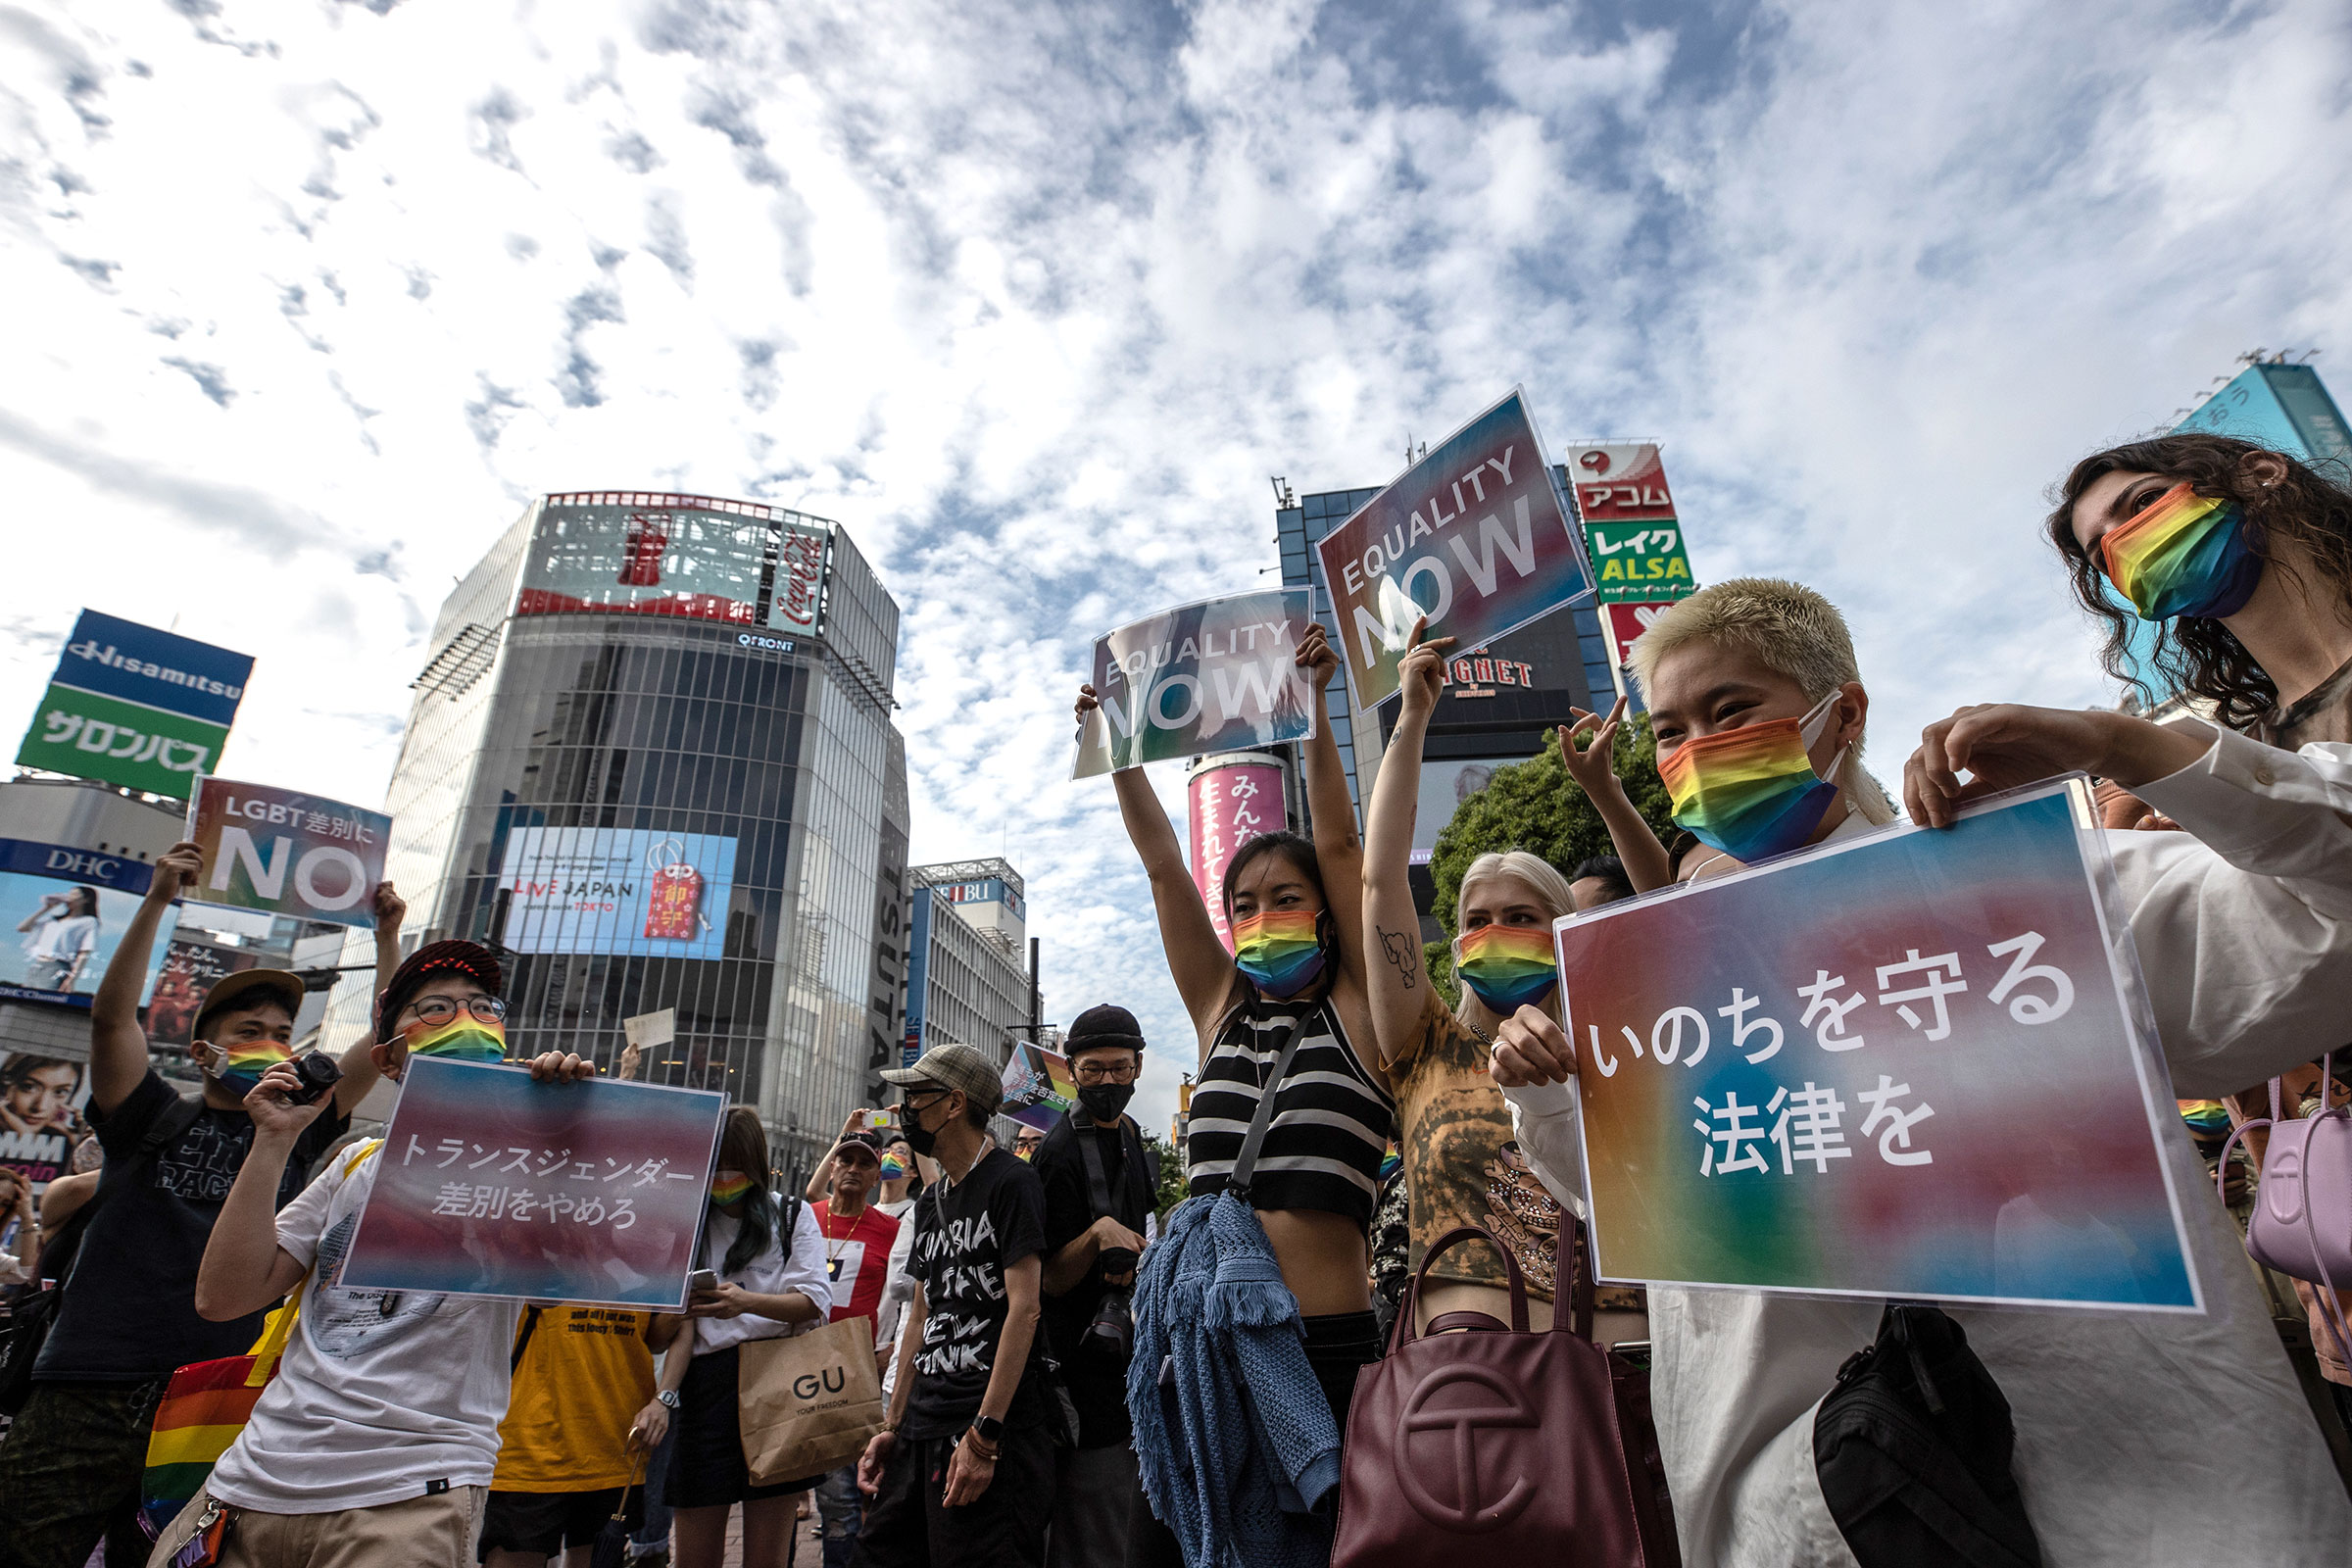 People gather during a rally calling for anti-discrimination legislation on June 6, 2021 in Tokyo. (Takashi Aoyama—Getty Images)